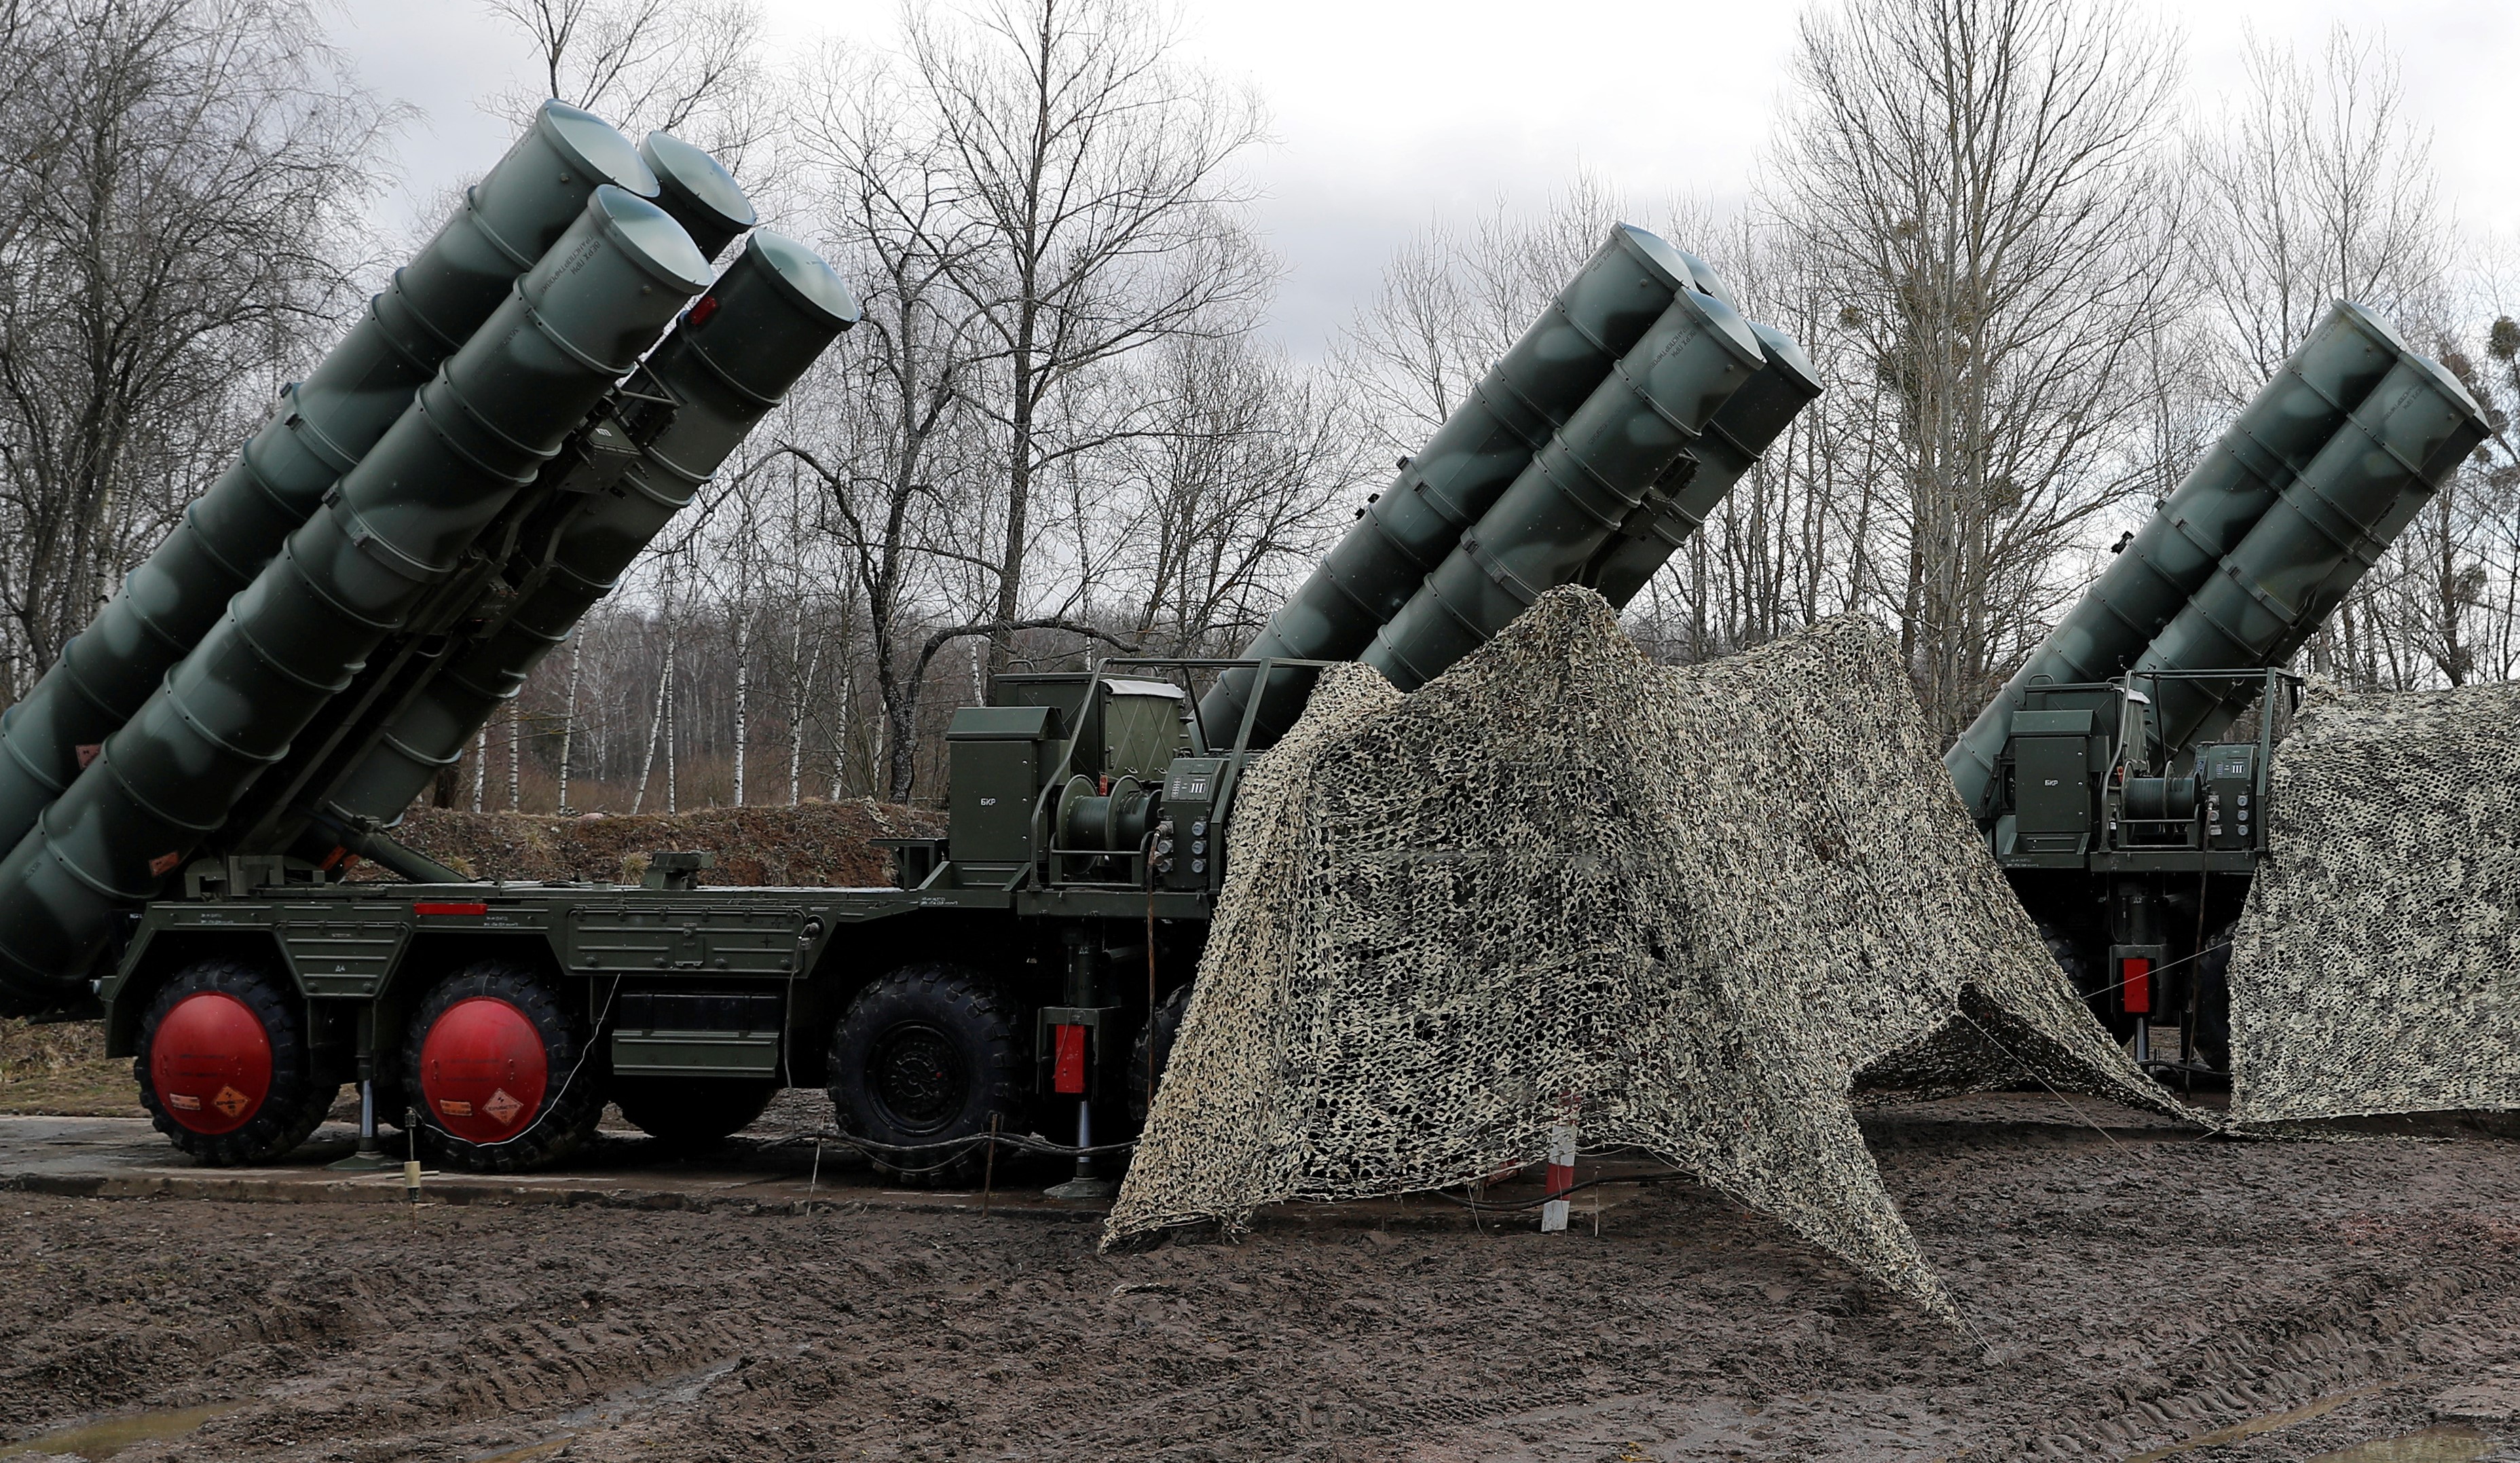 Turkey activated the S-400 missile system in defiance of Washington (Reuters)